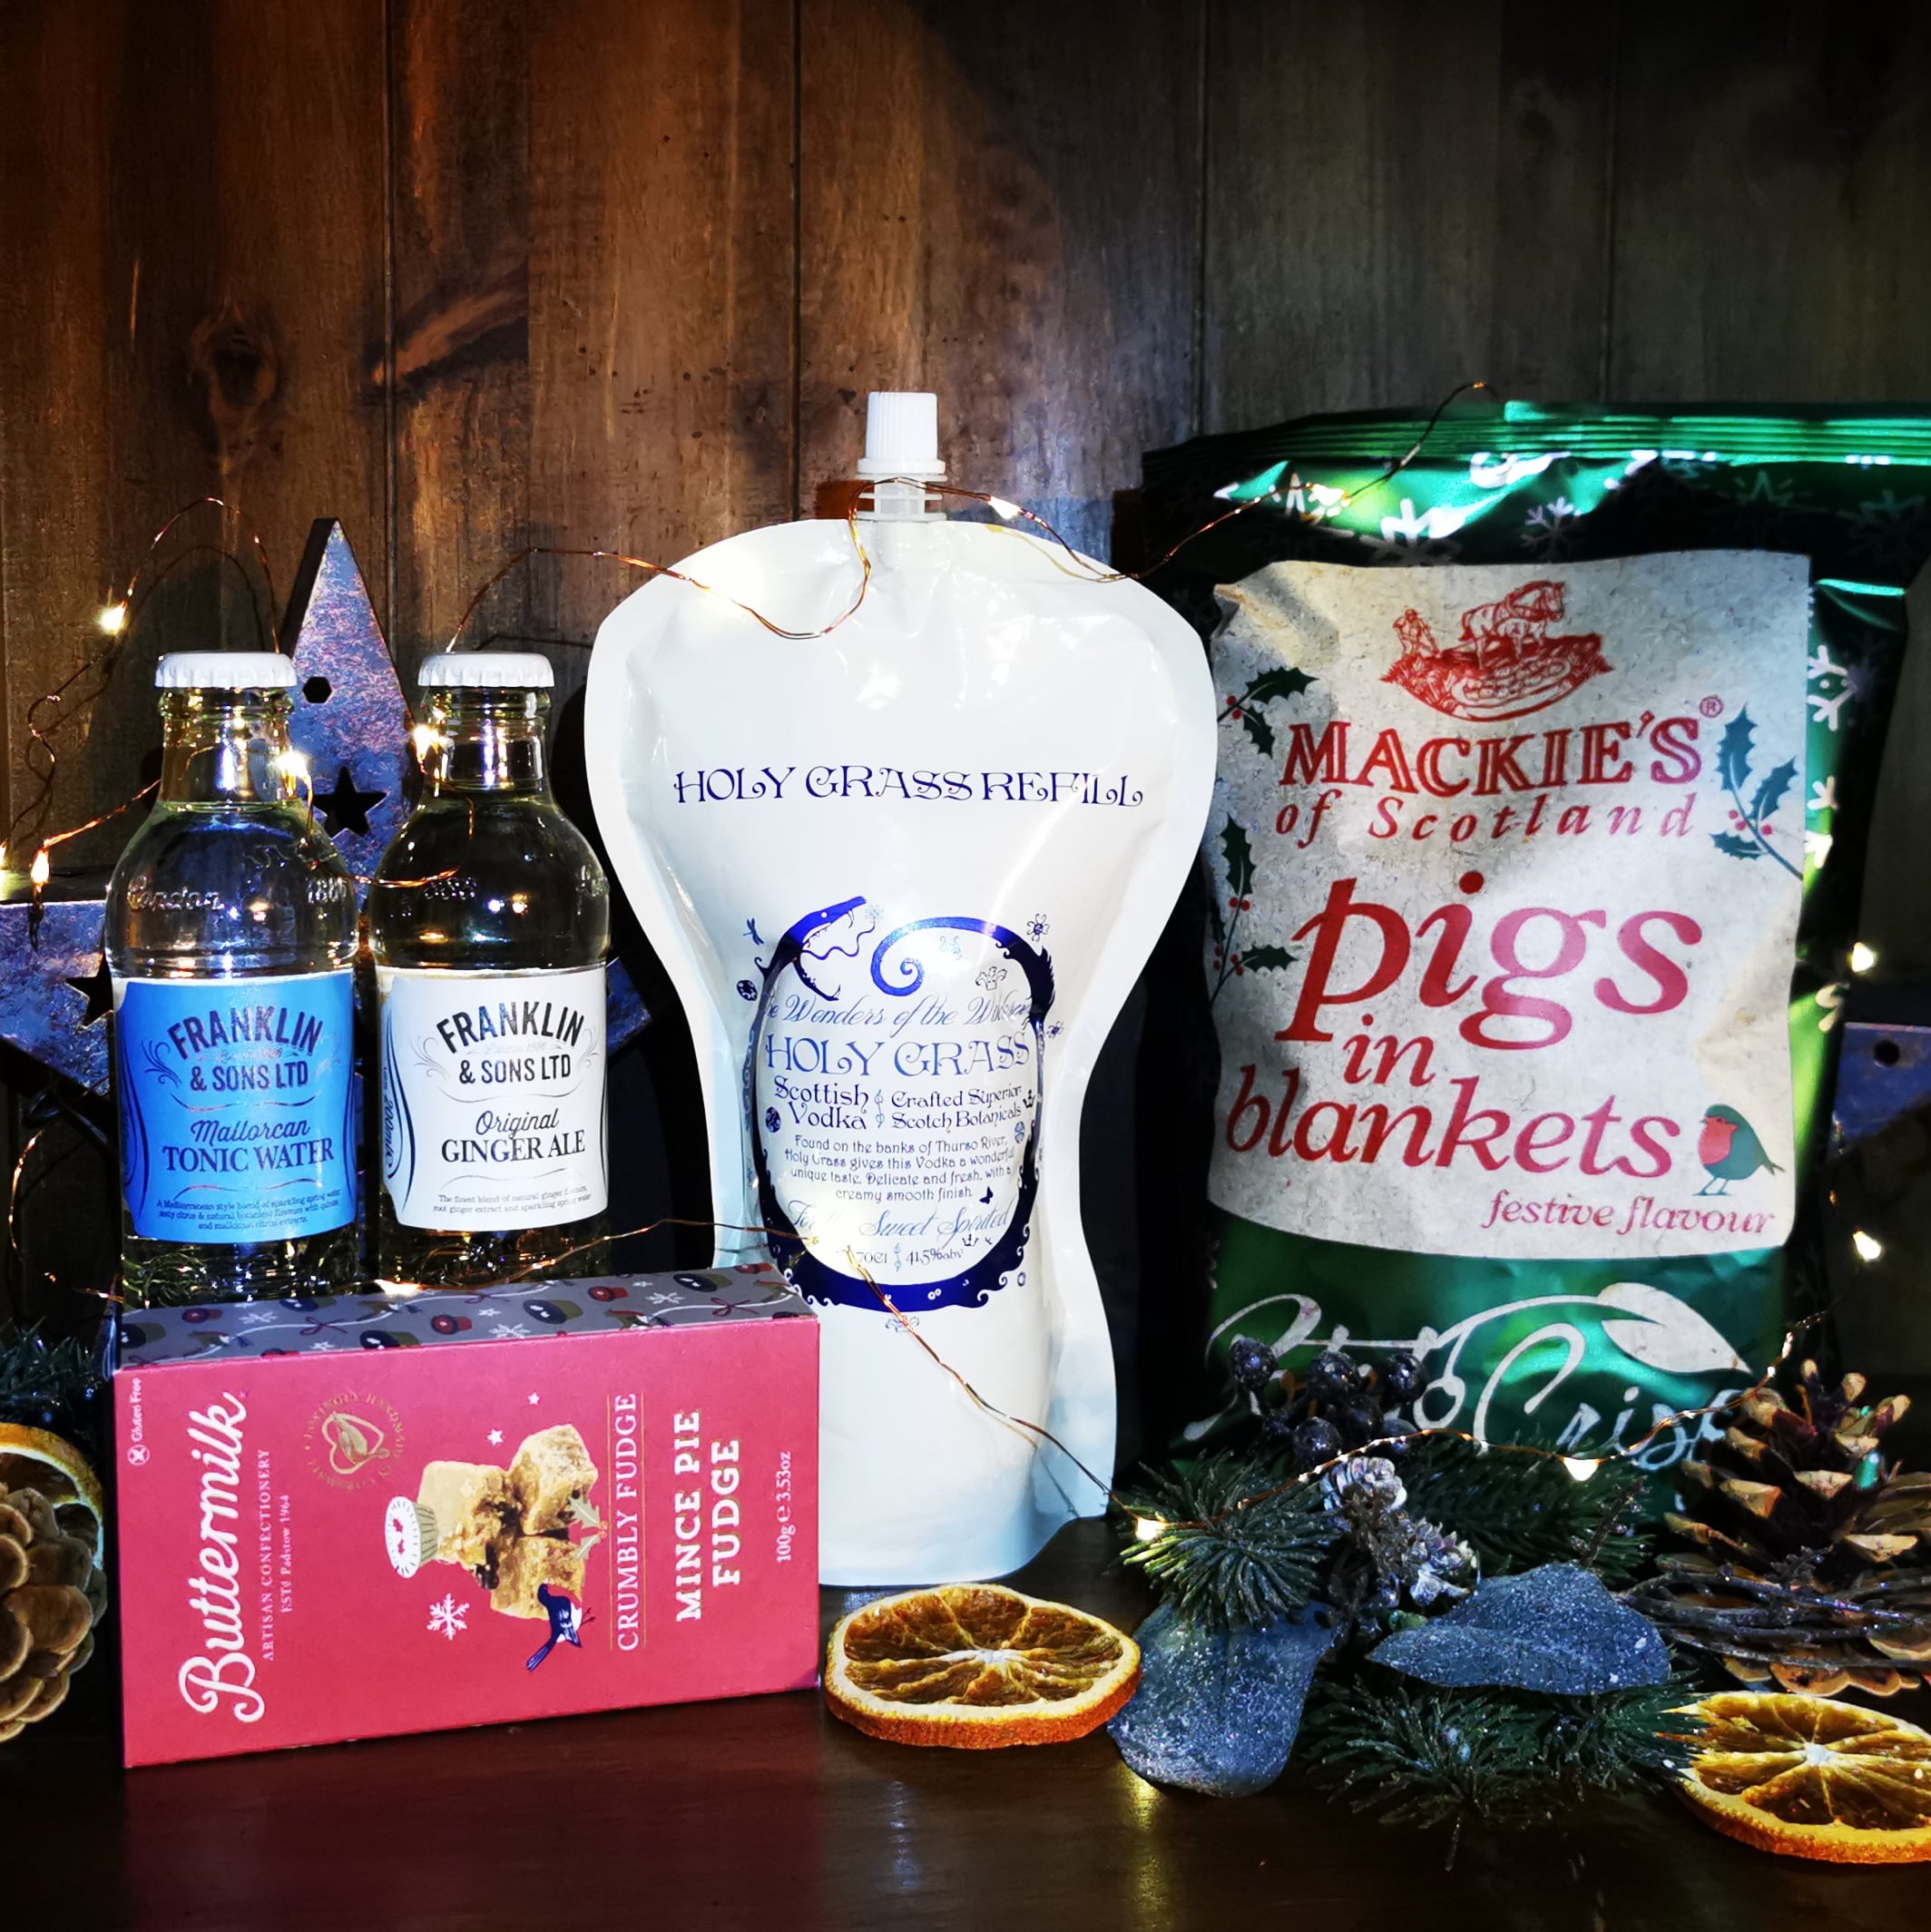 Content of the Refill Rewards Club box for December 2022 including Holy Grass Vodka pouch, tonic water, ginger ale, mince fudge, pigs in blankets crisps